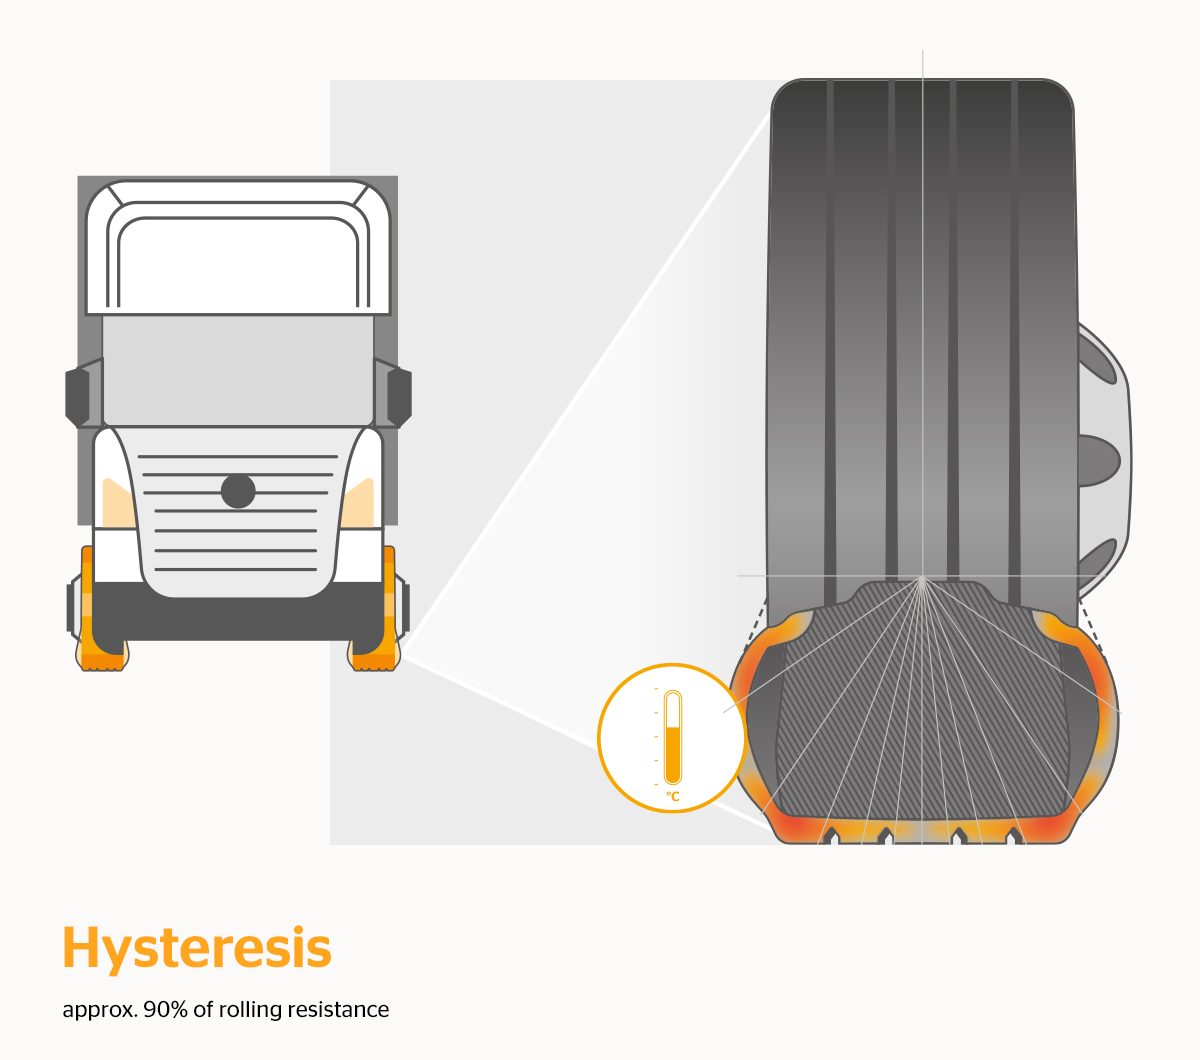 How hysteresis affects rolling resistance